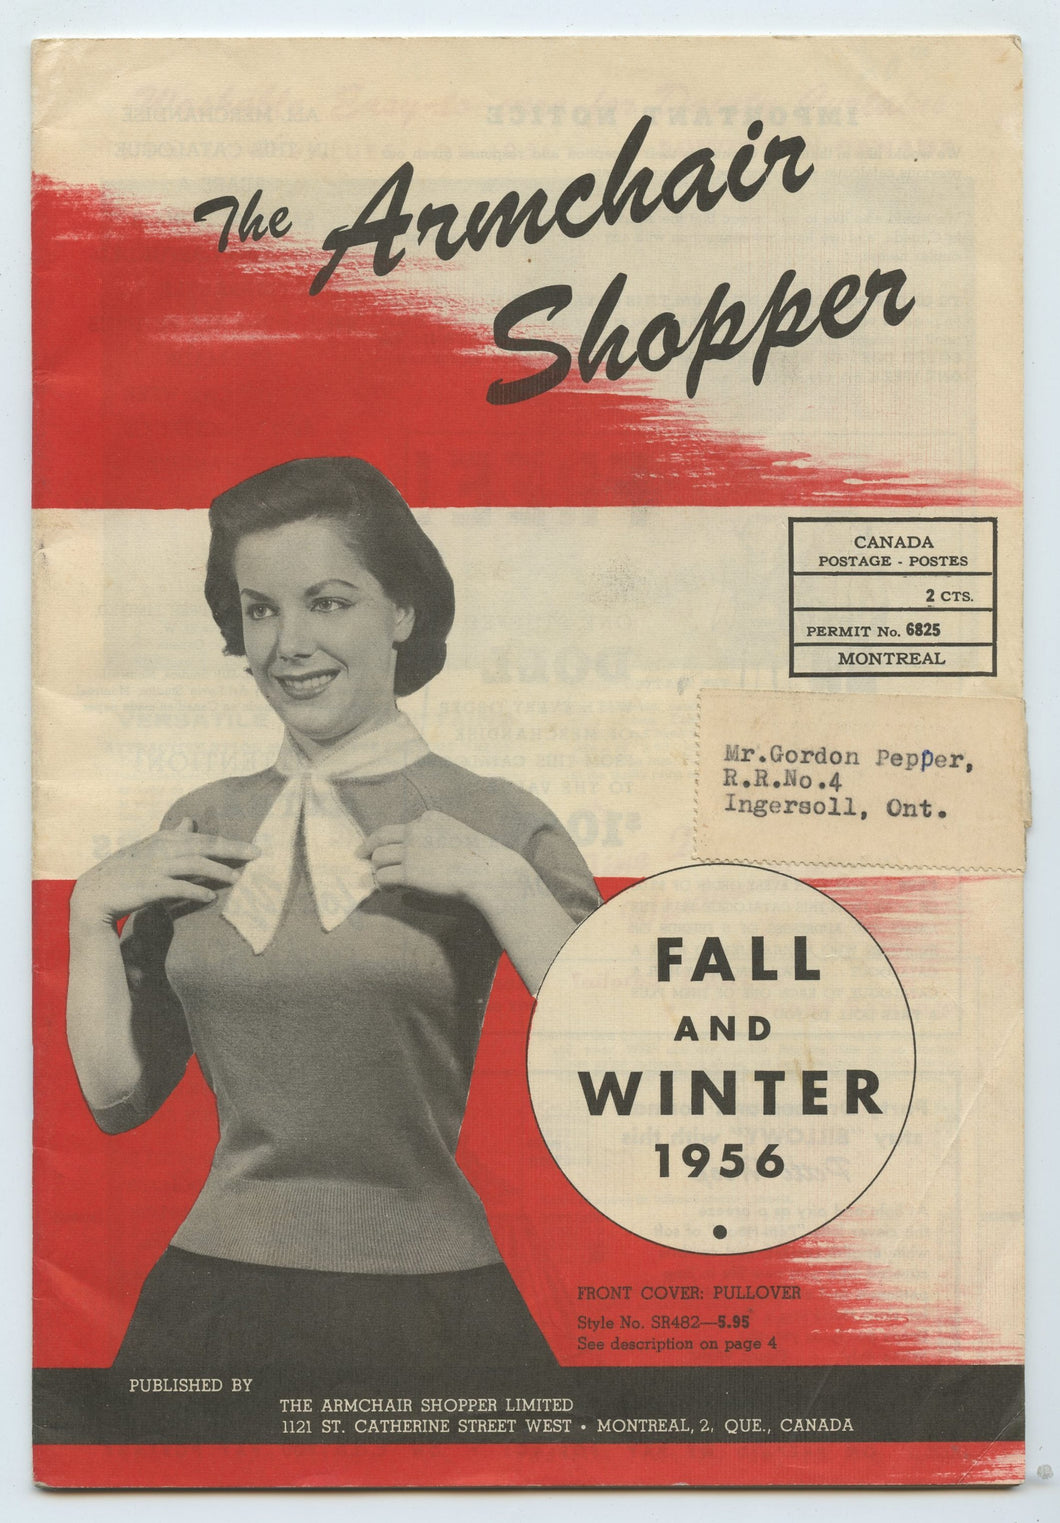 The Armchair Shopper Fall and Winter 1956